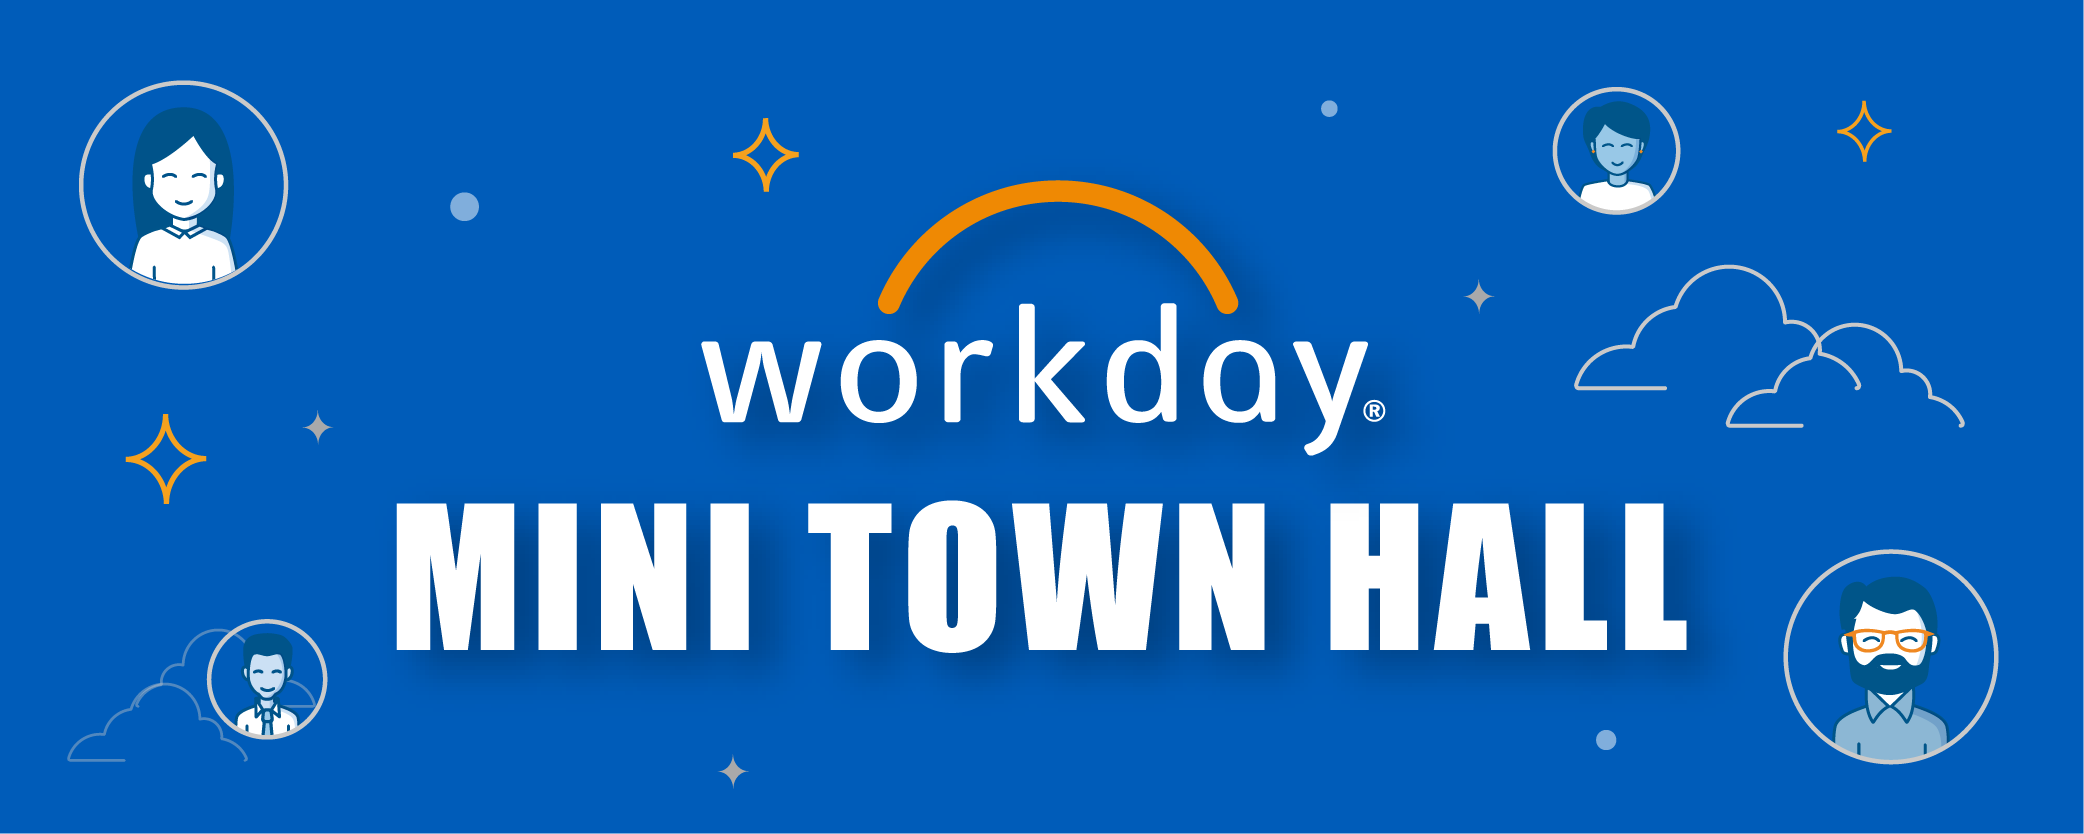 Workday Mini Town Hall banner